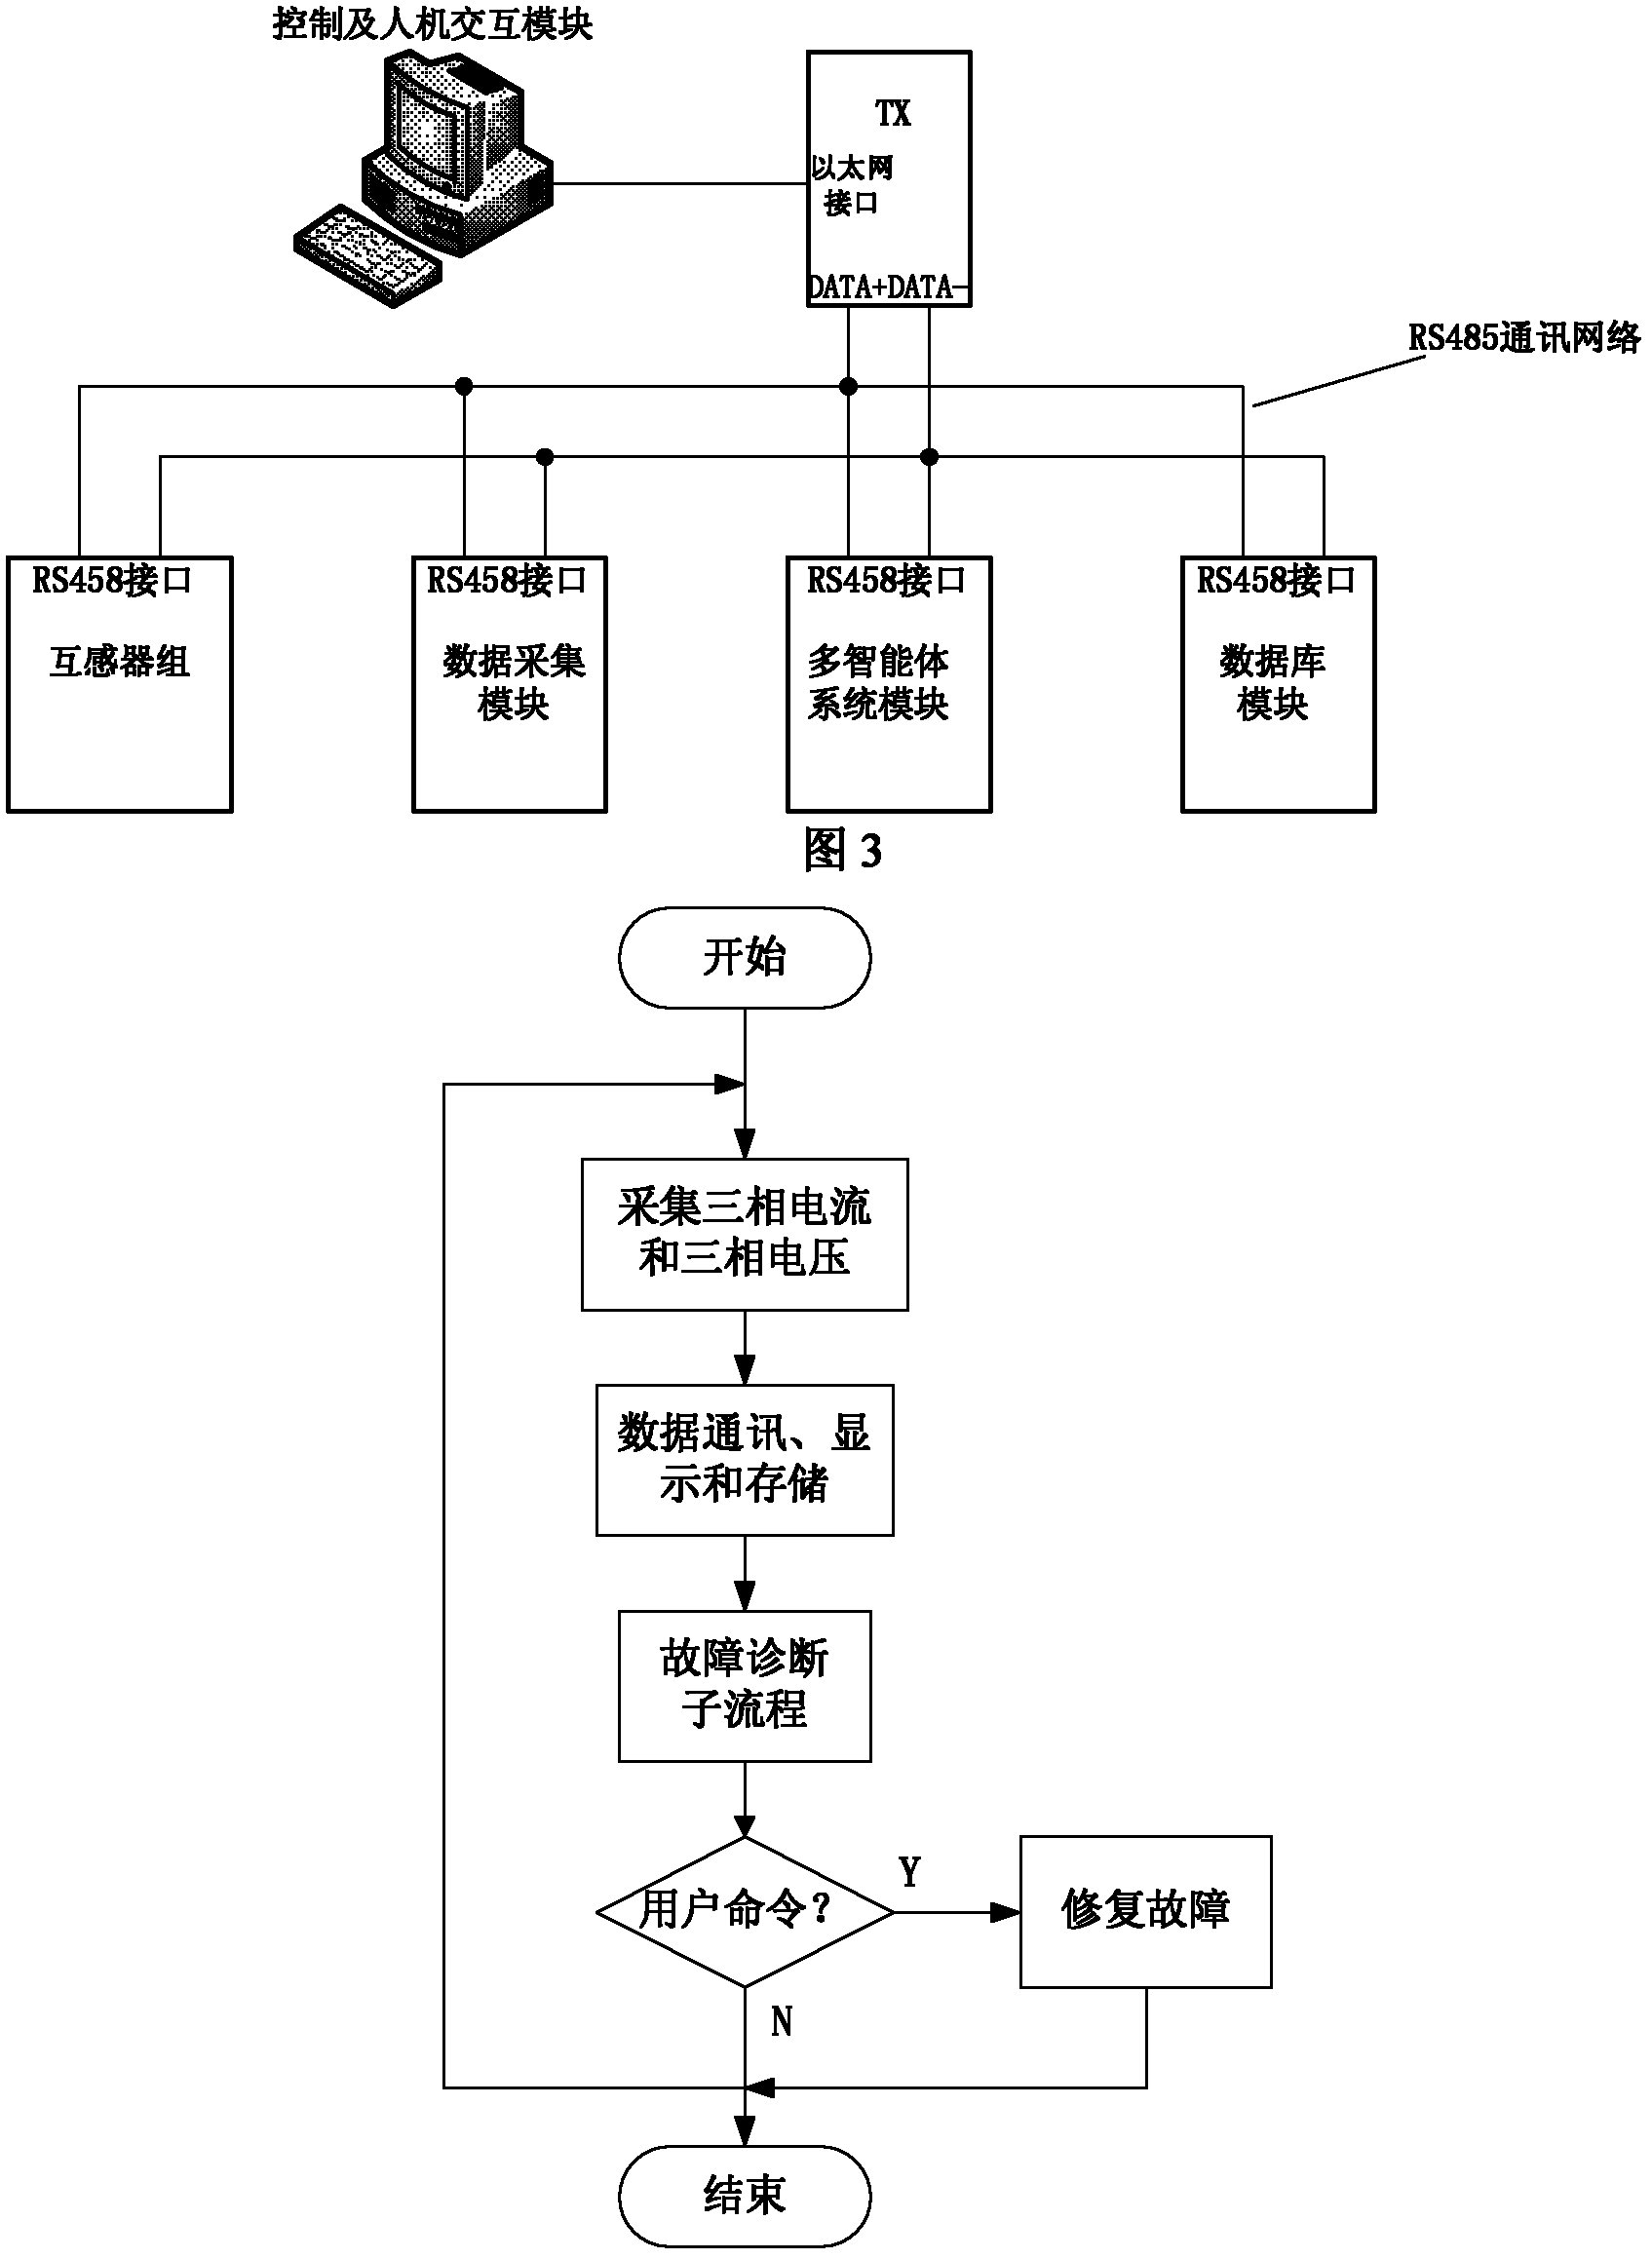 Fault diagnosis device and method based on multi-agent system and wavelet analysis